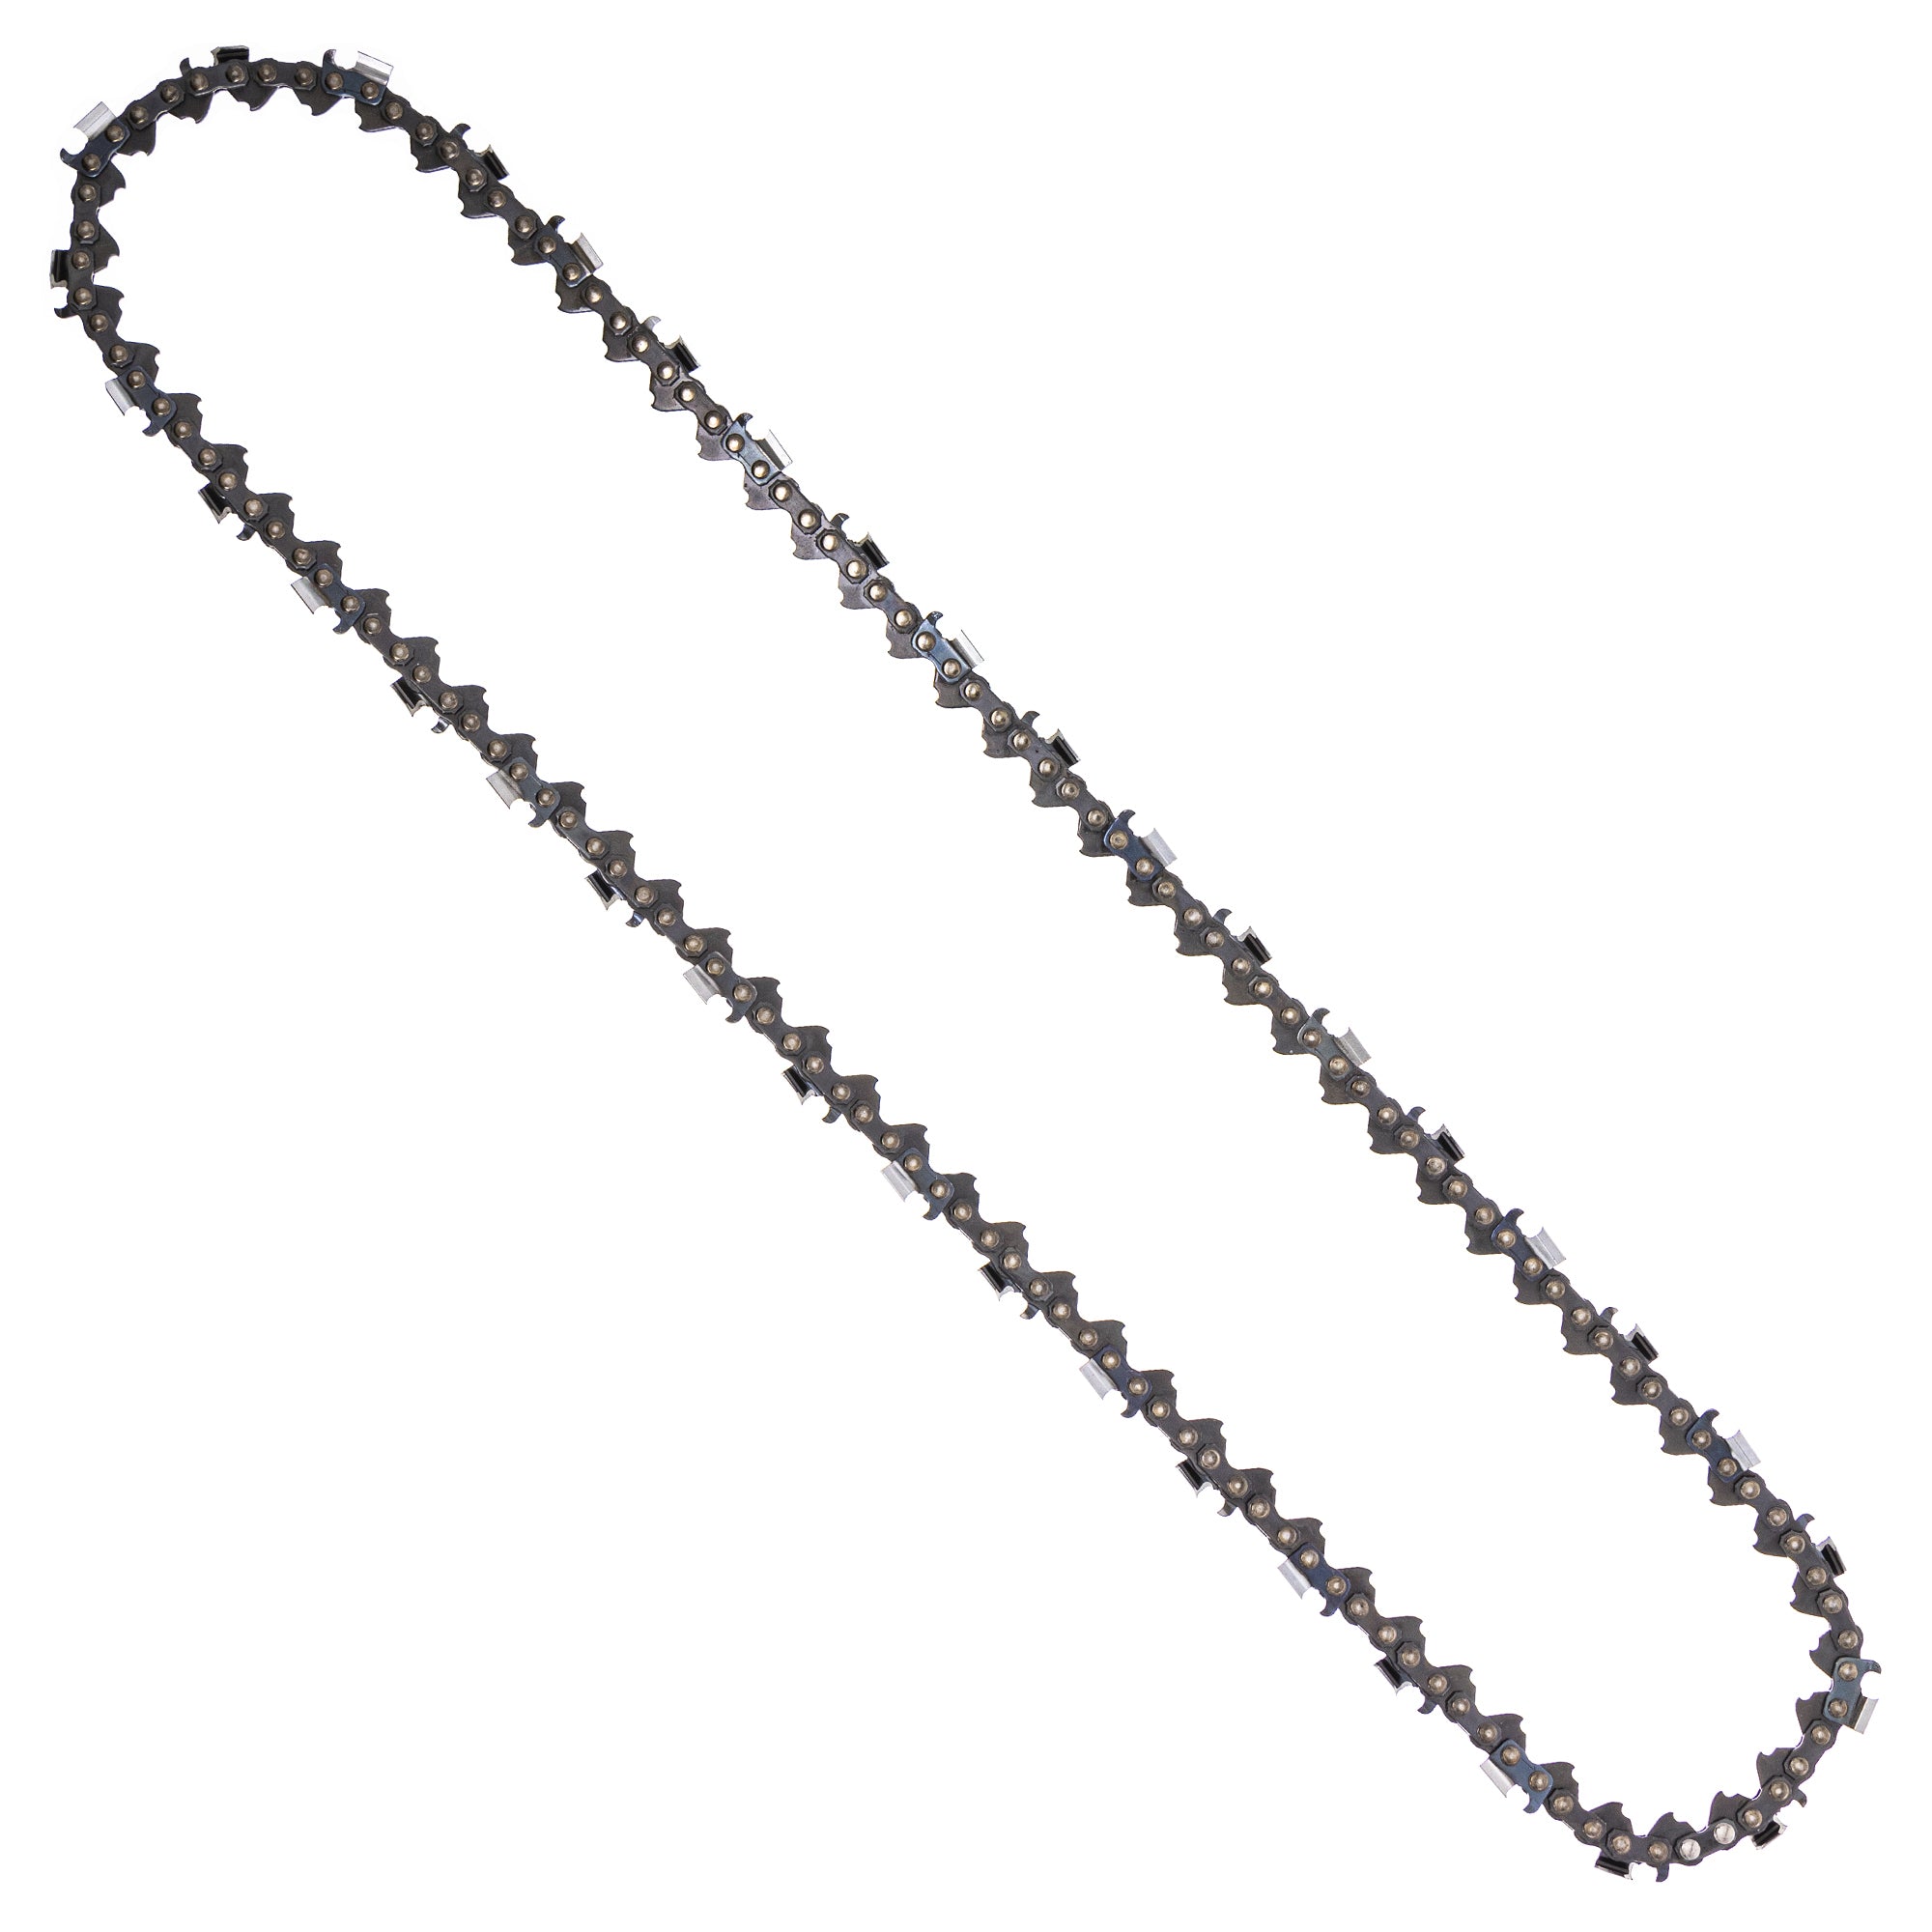 8TEN 810-CCC2224H Chain 6-Pack for zOTHER Windsor Stens Oregon